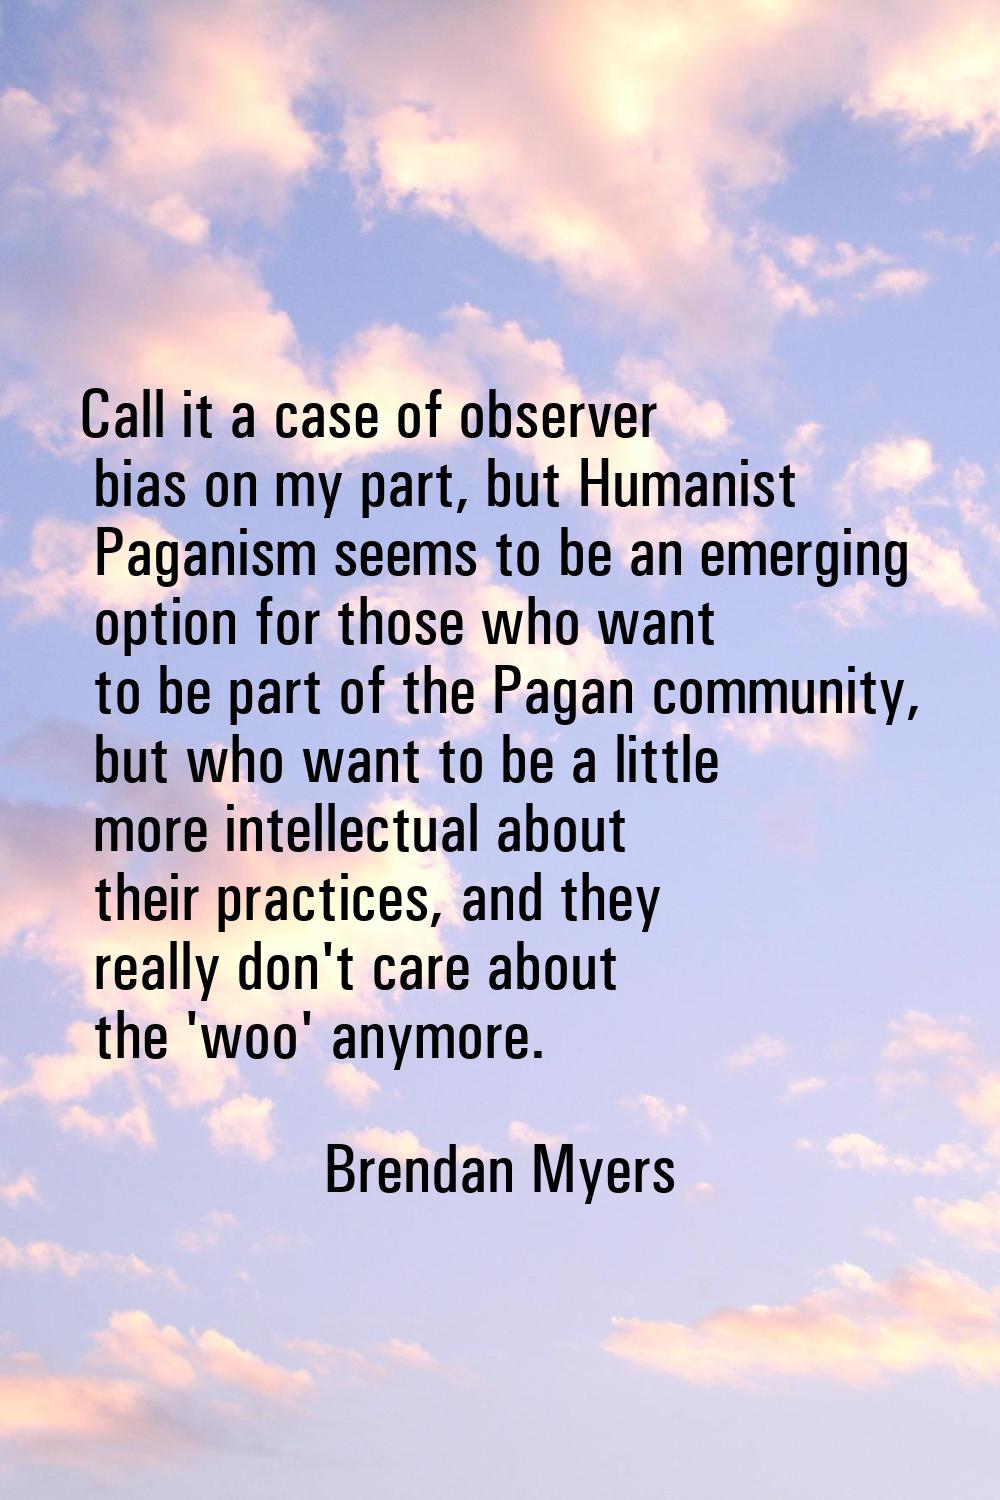 Call it a case of observer bias on my part, but Humanist Paganism seems to be an emerging option fo